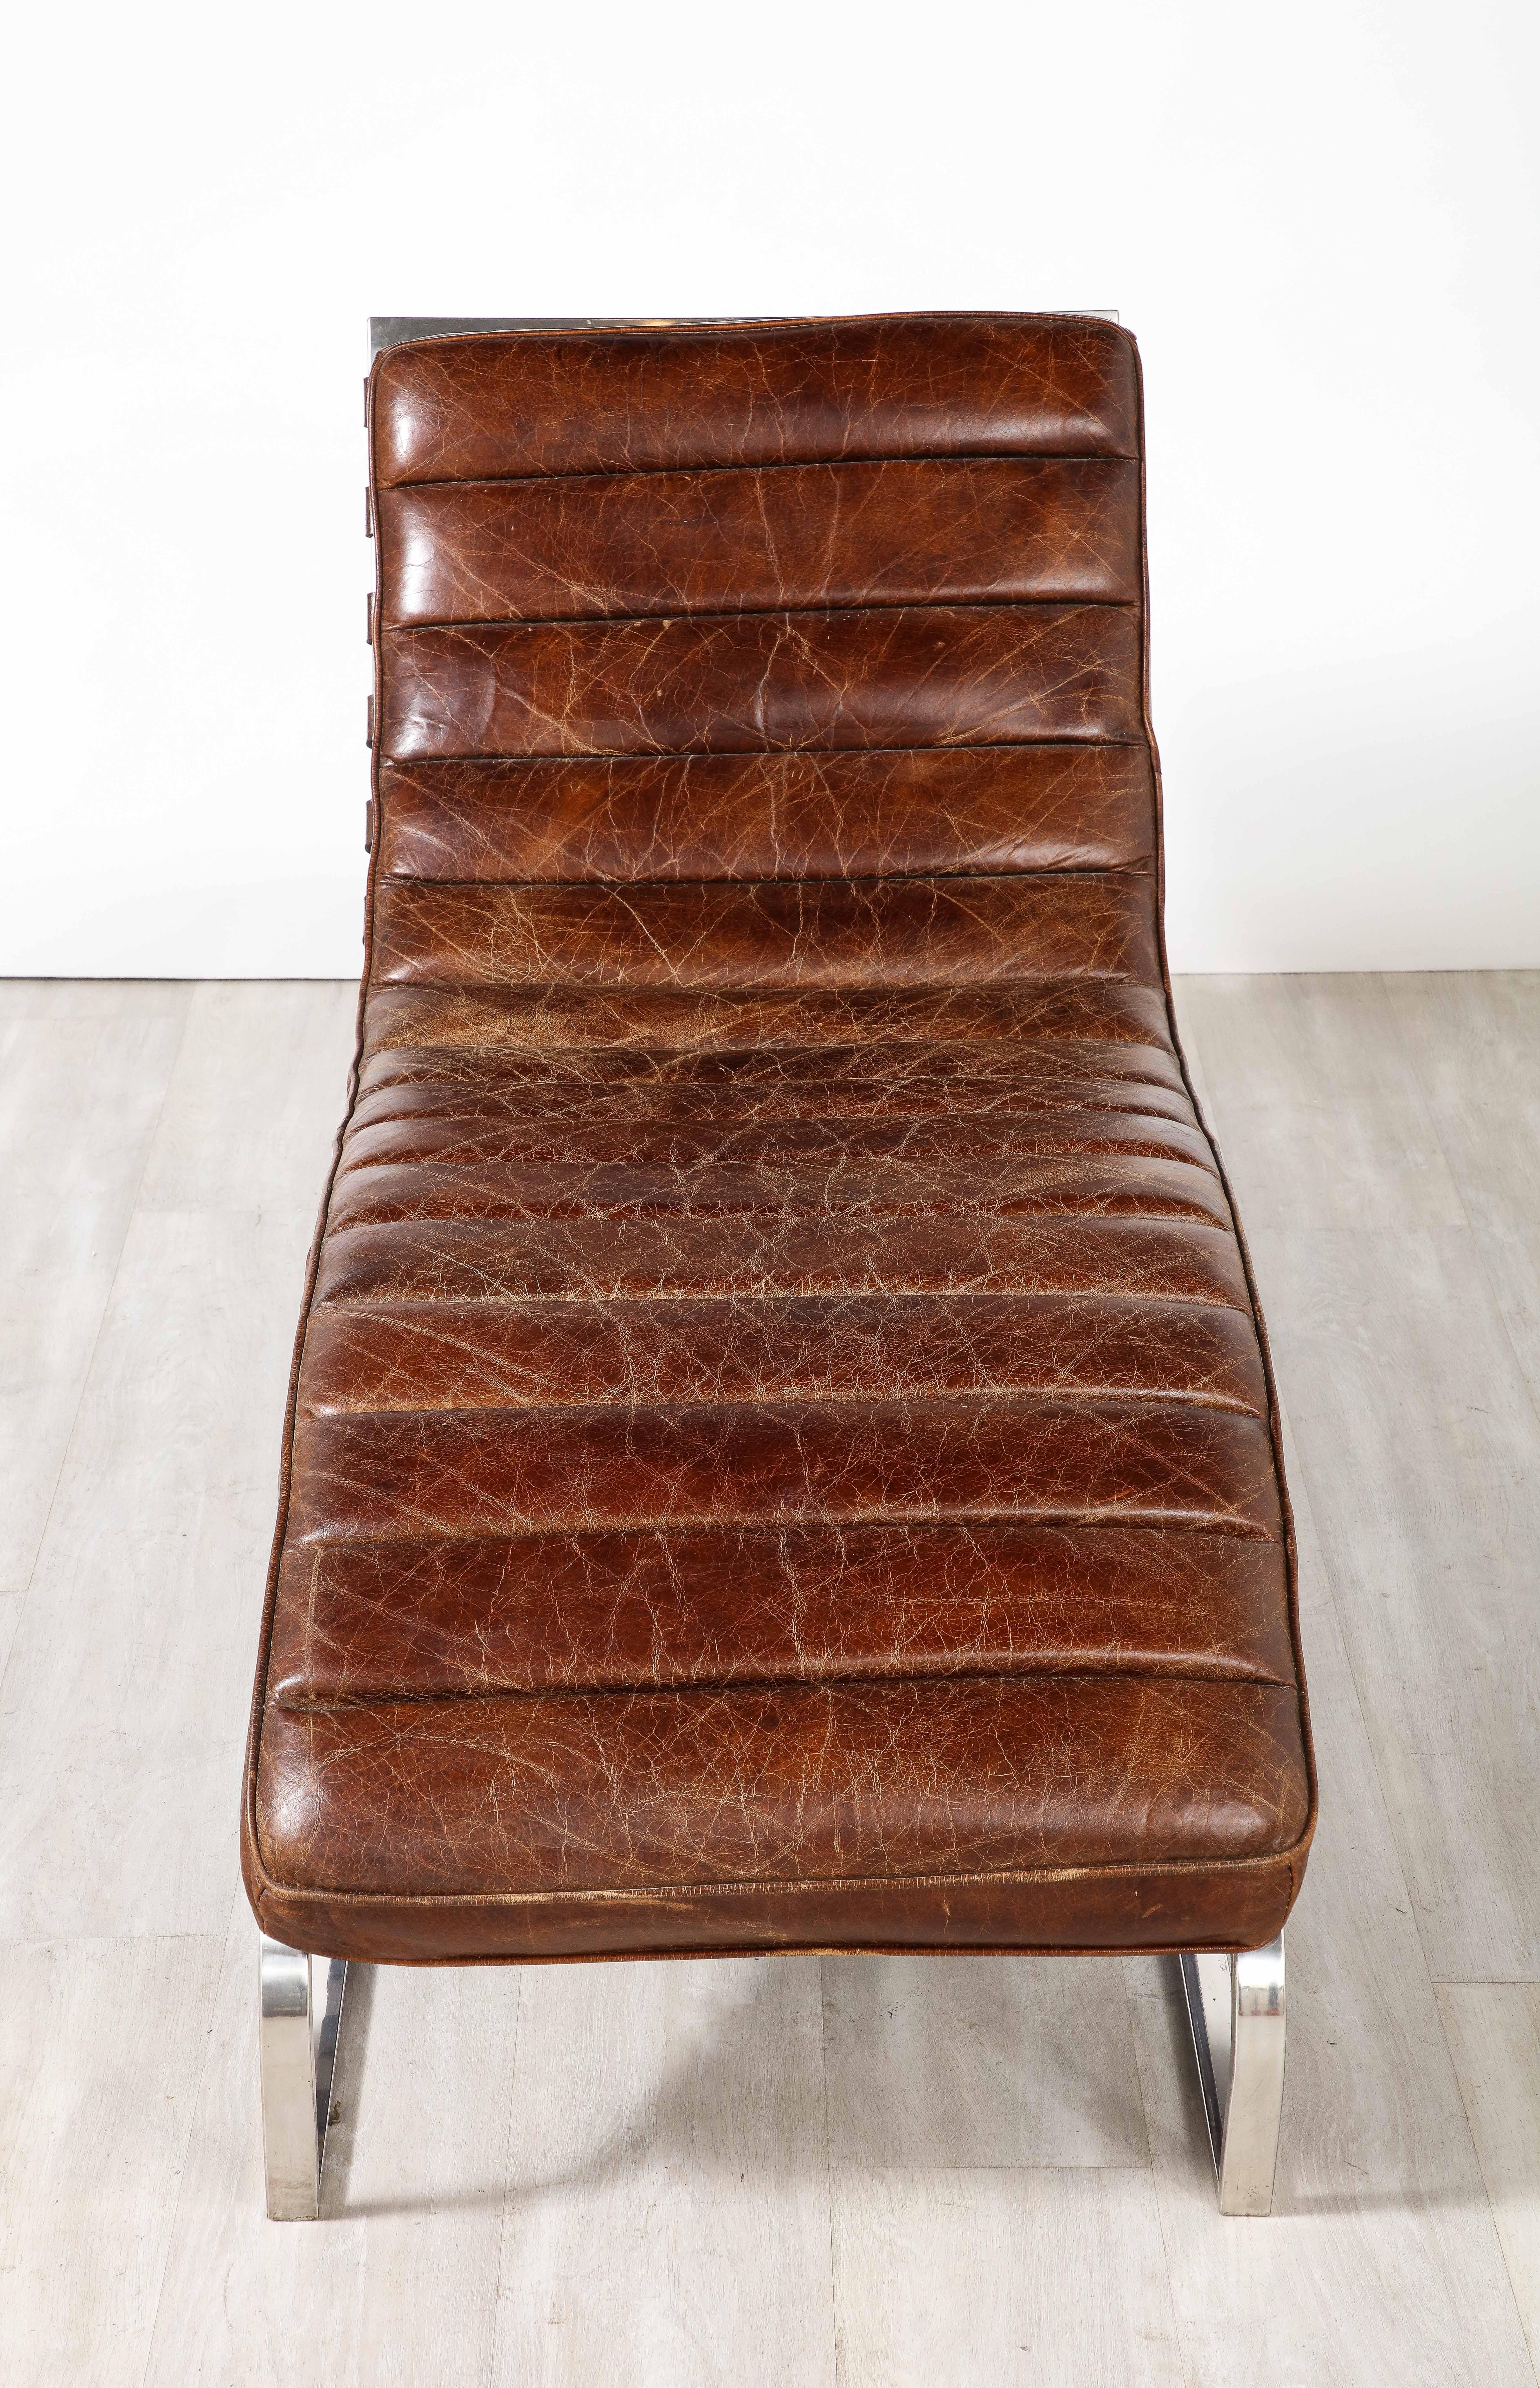 Italian Channeled Leather and Chrome Chaise Longue, 1970 For Sale 7